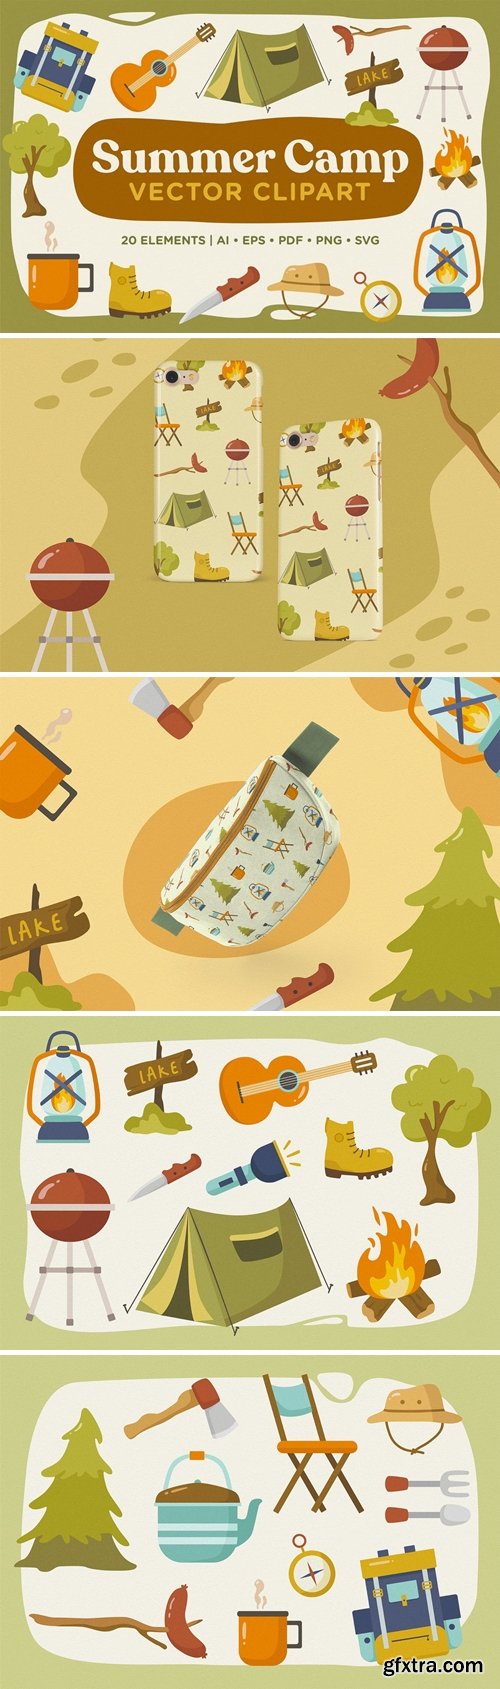 Summer Camp Vector Clipart Pack